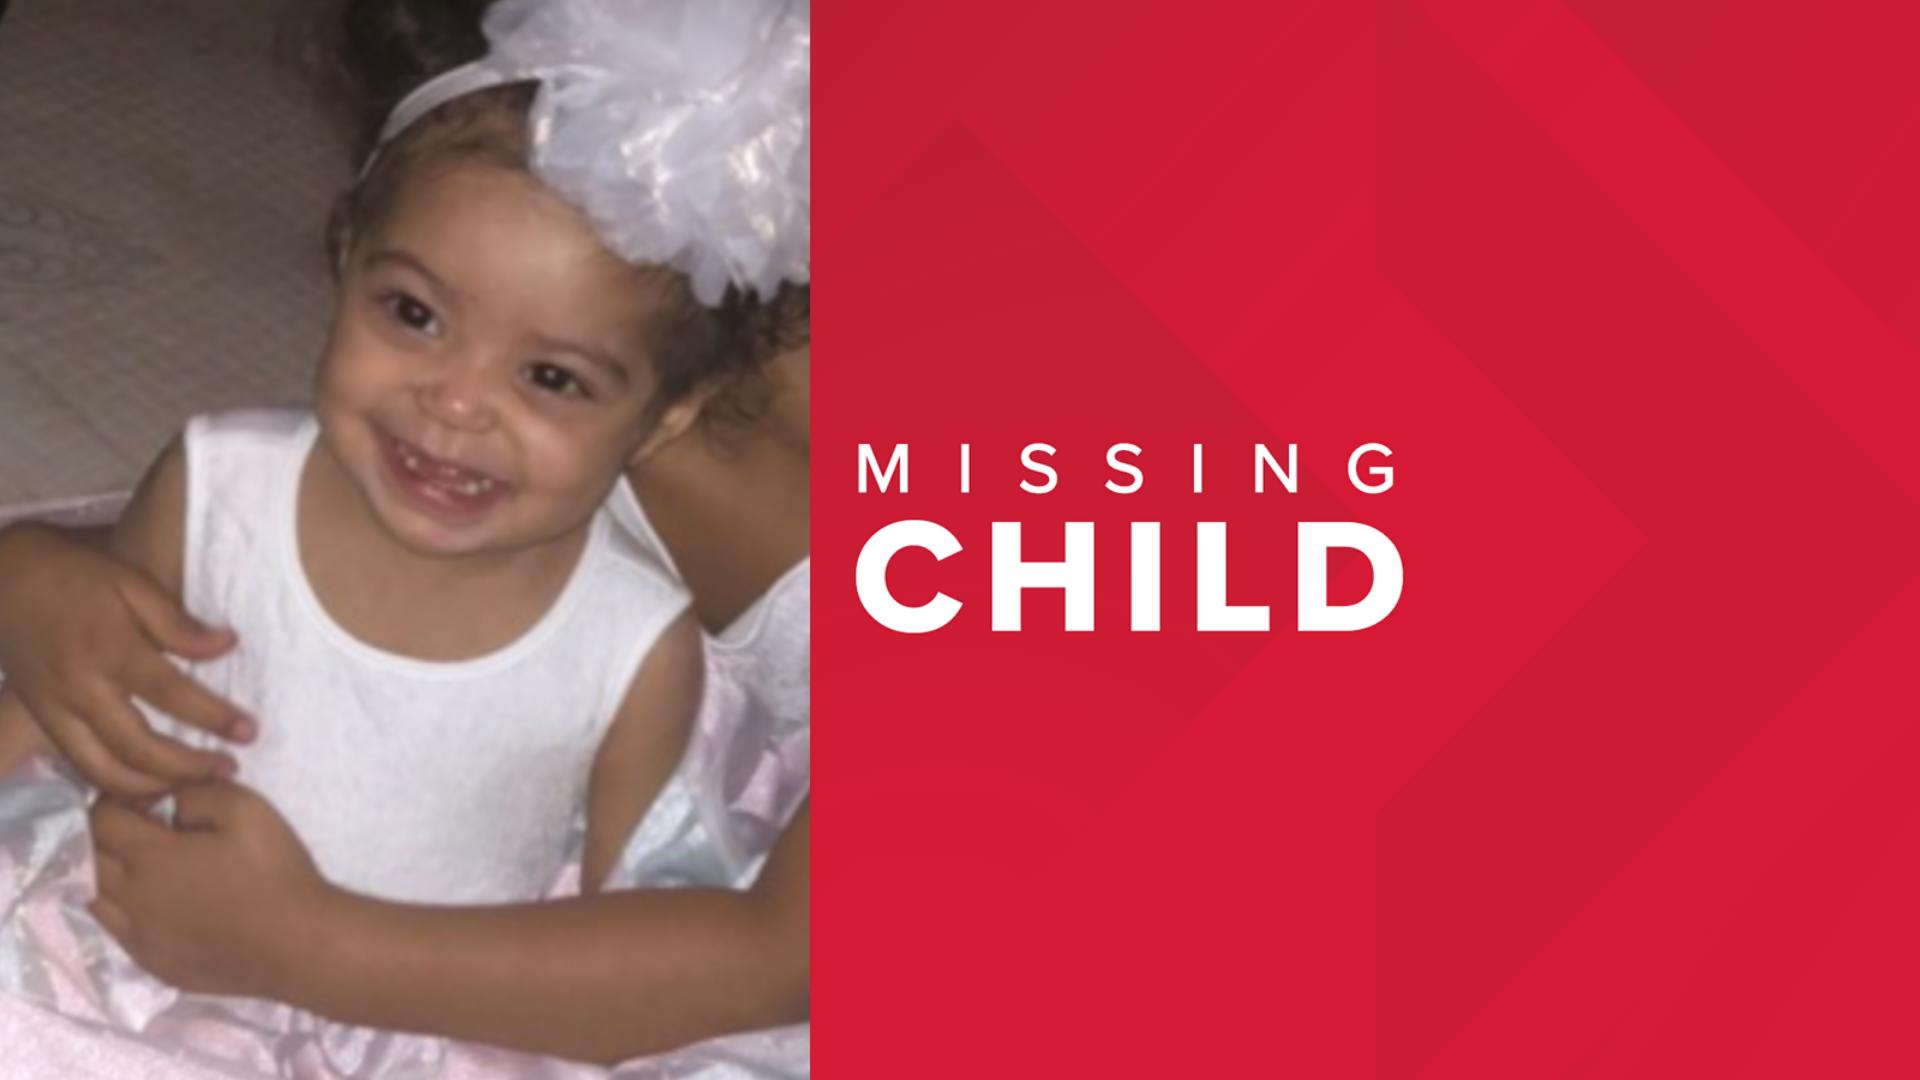 NOPD searching for missing child. The Family says her legal guardian died and they don't know who took her